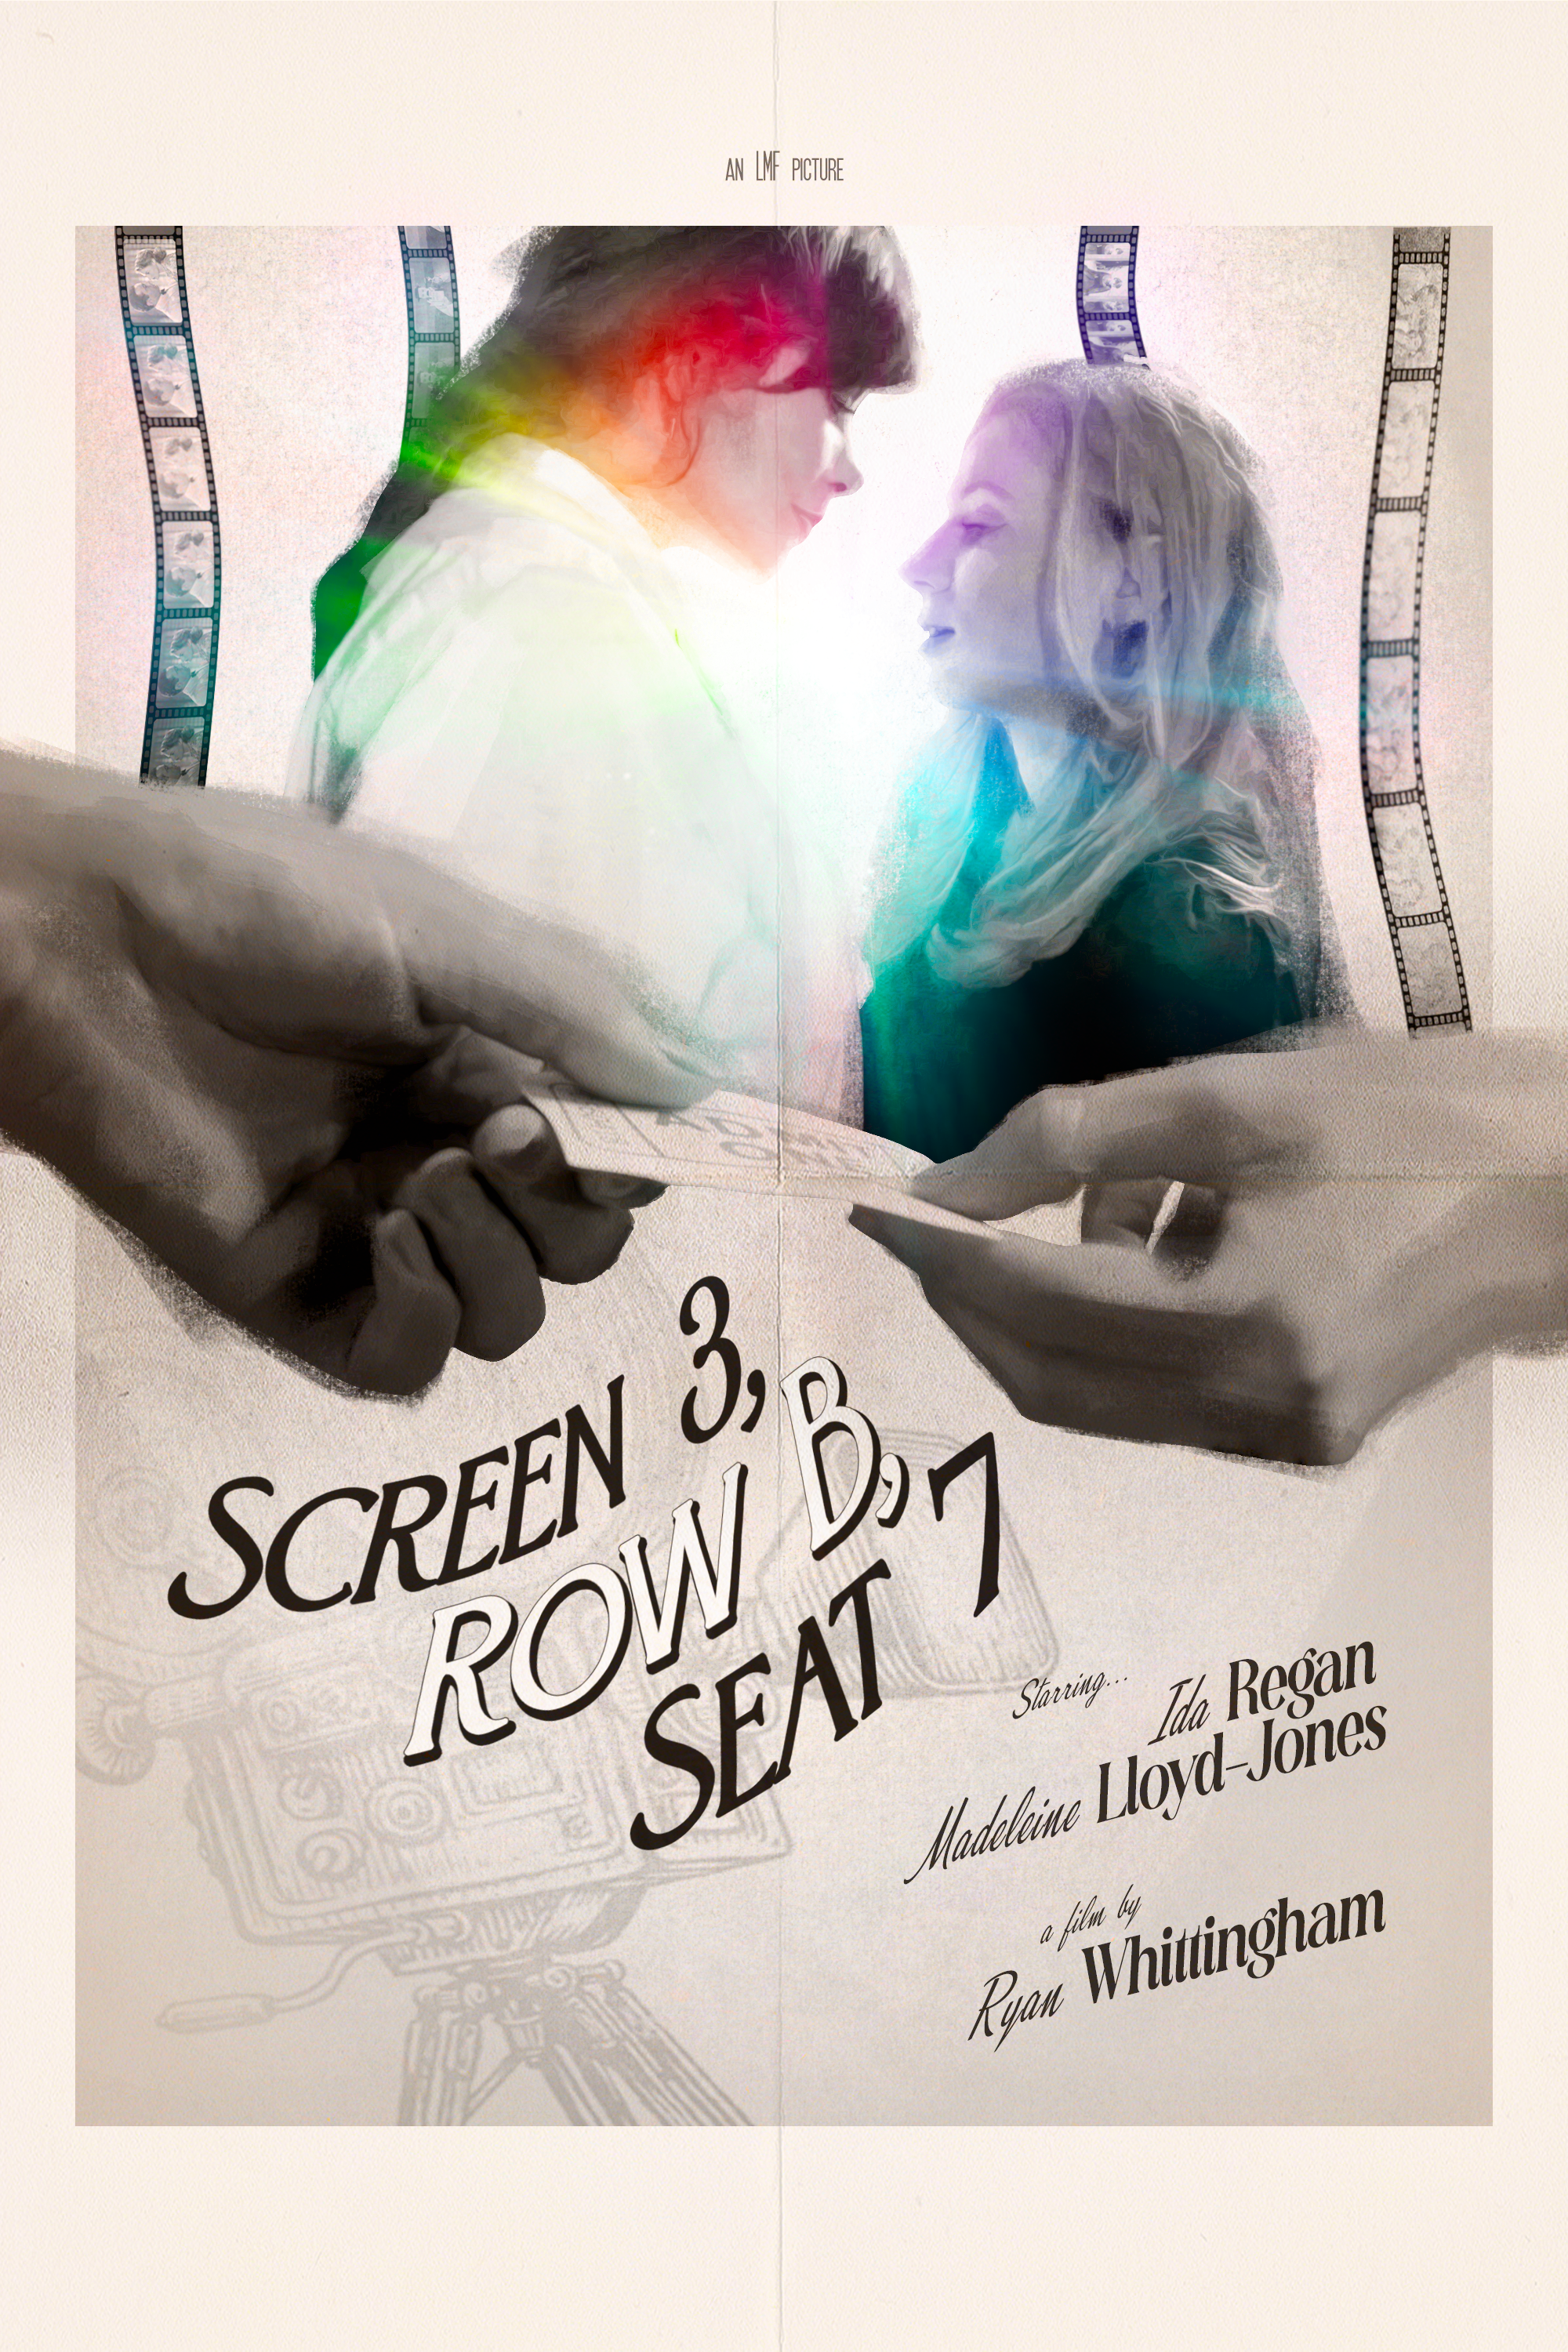 Poster for Screen 3 Row b seat 7 short film